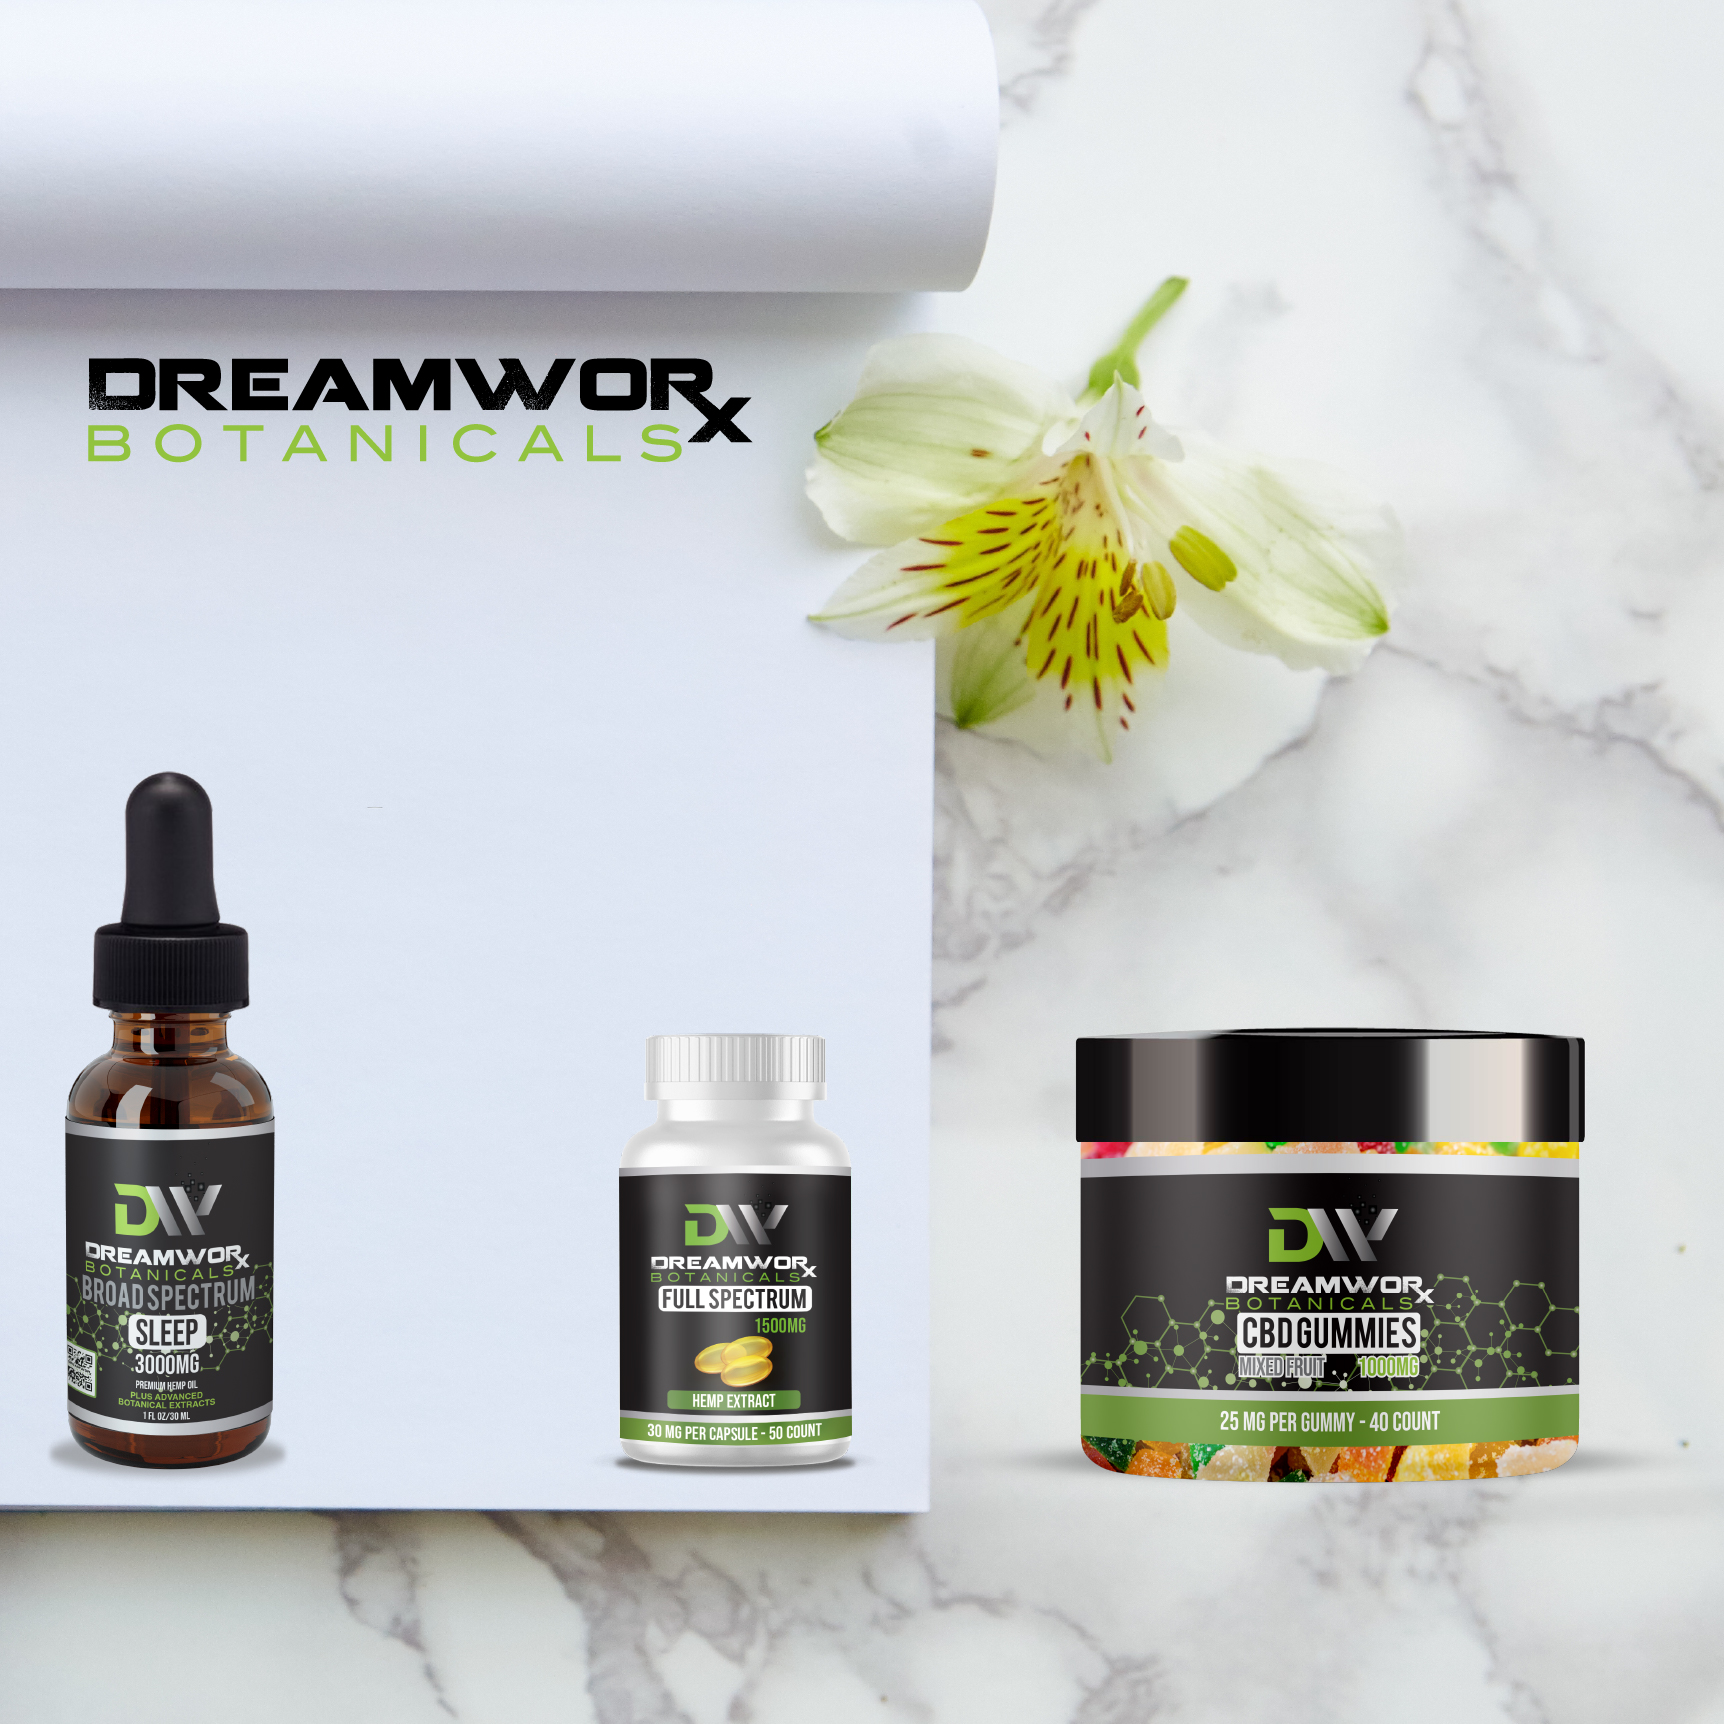 CBD For Pain Fort Worth - Could Fort Worth CBD Be Beneficial - DreamWoRx Fort Worth CBD For Pain - Could DreamWoRx CBD Help In Fort Worth